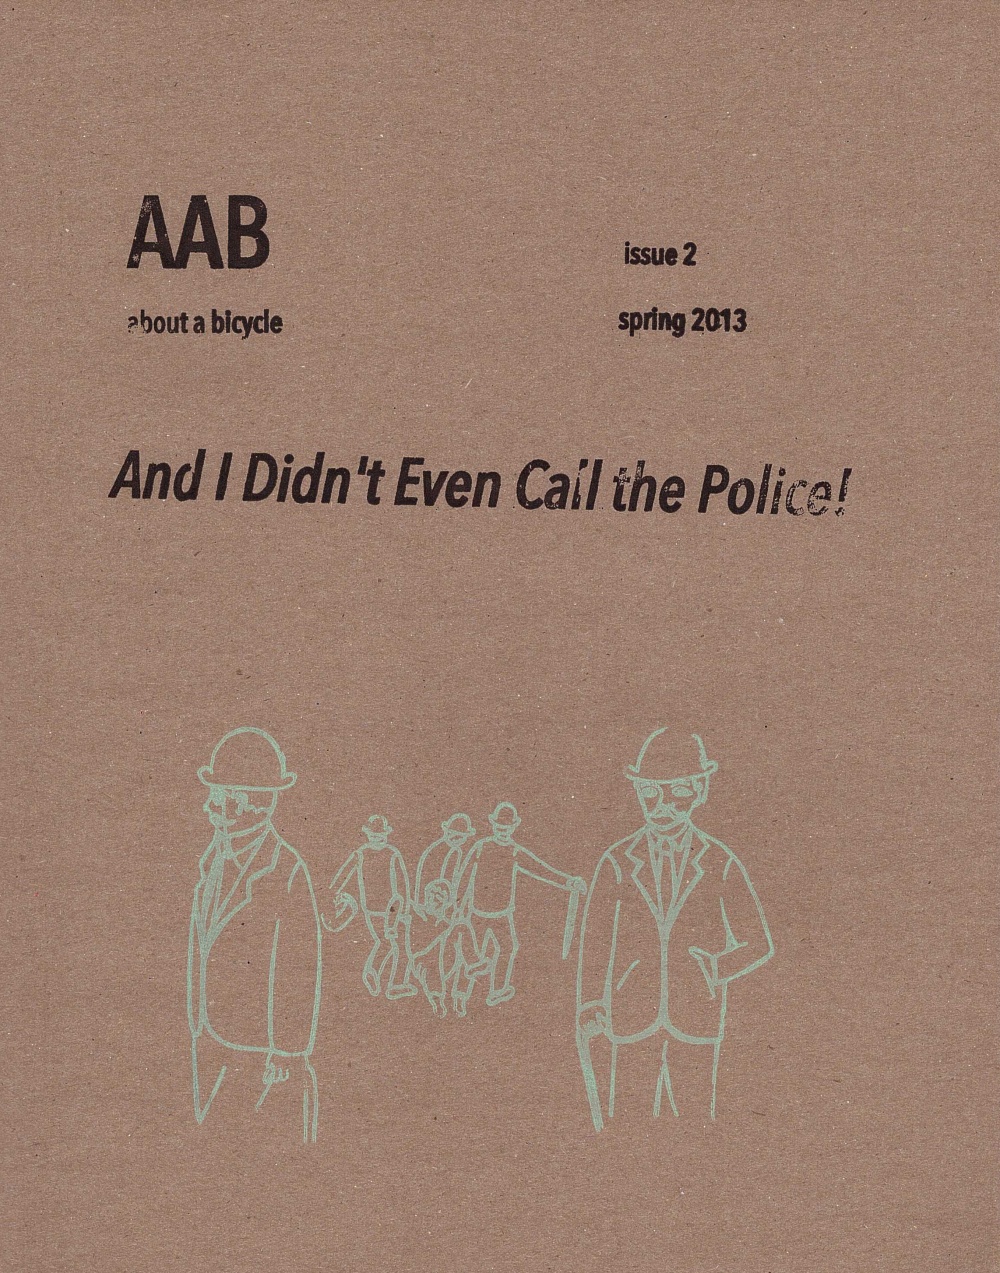 About A Bicycle Issue 2: And I Didn’t Even Call the Police!